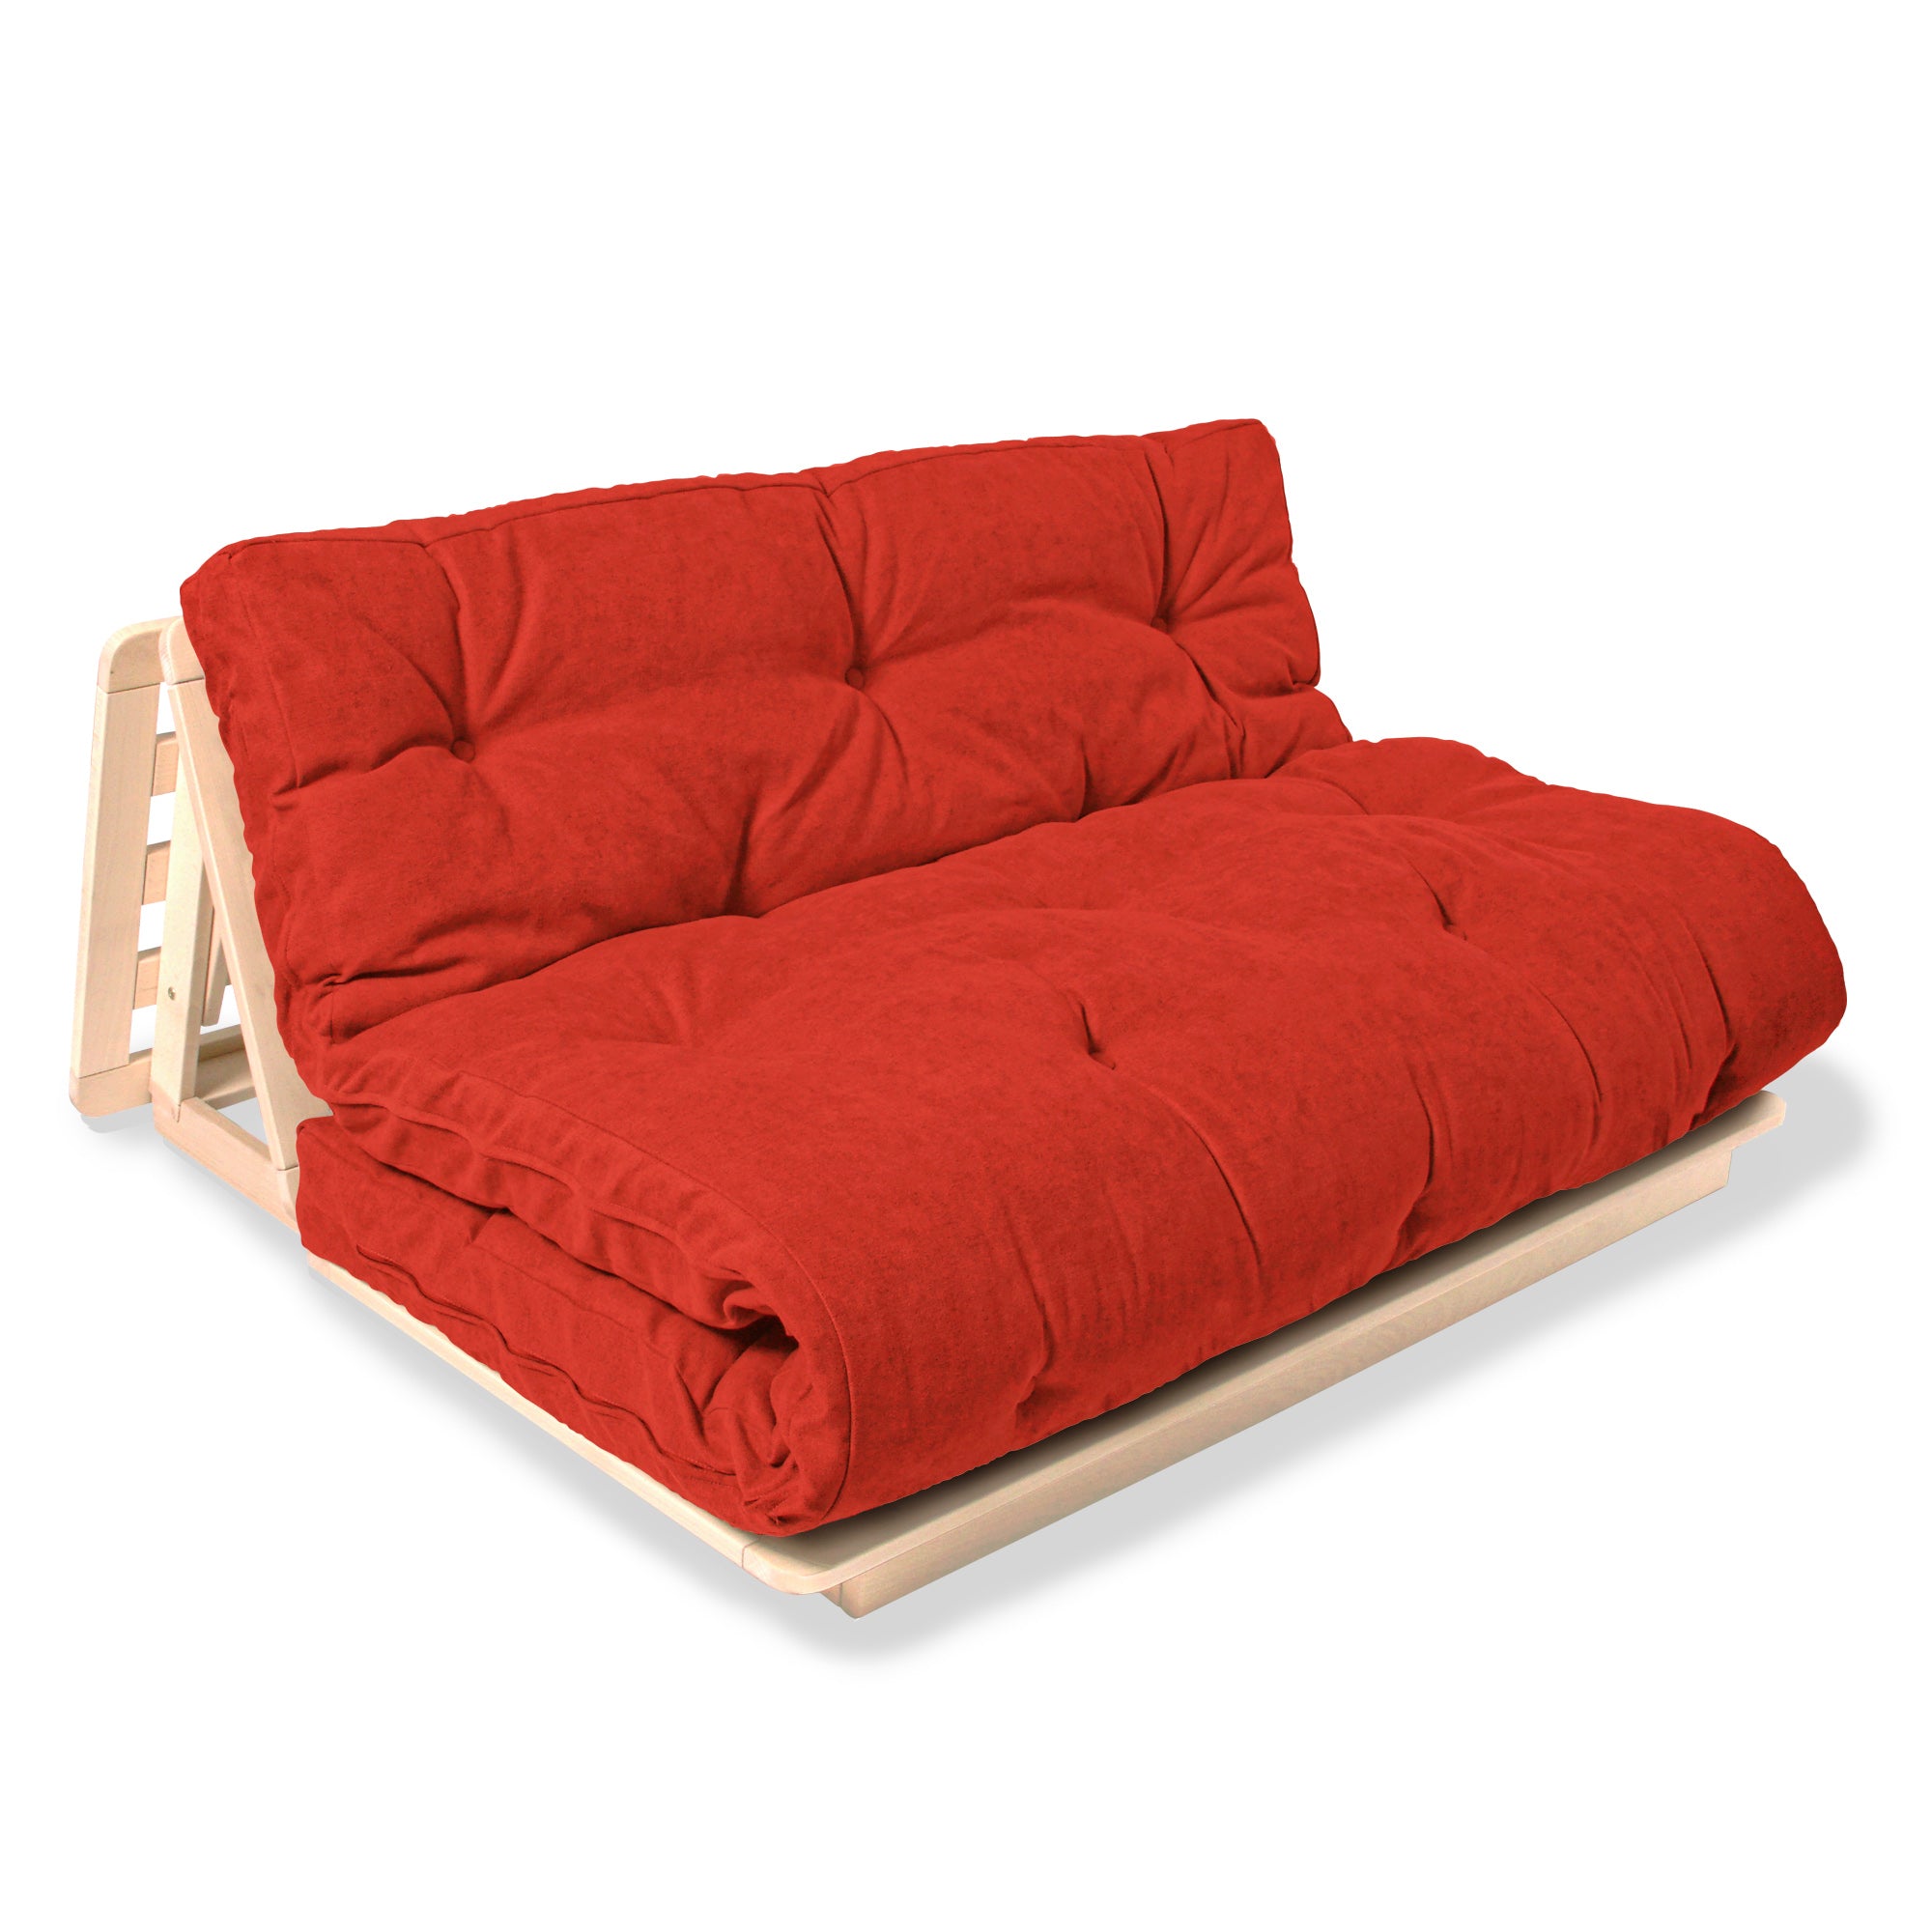 LAYTI-140 Futon Chair, Beech Wood, Natural Colour-red fabric